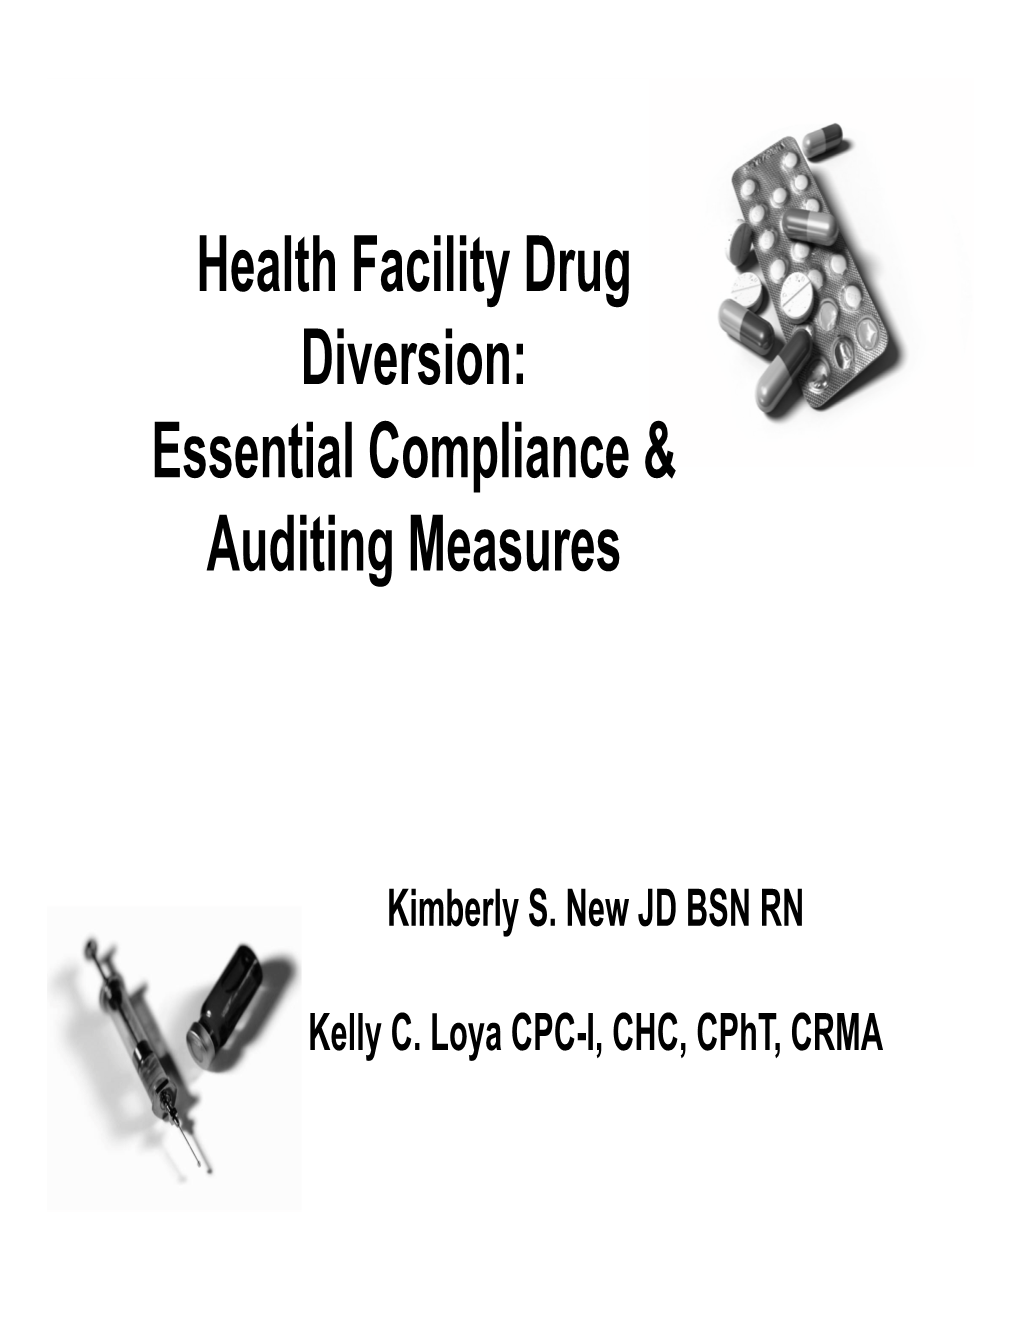 Health Facility Drug Diversion: Essential Compliance & Auditing Measures